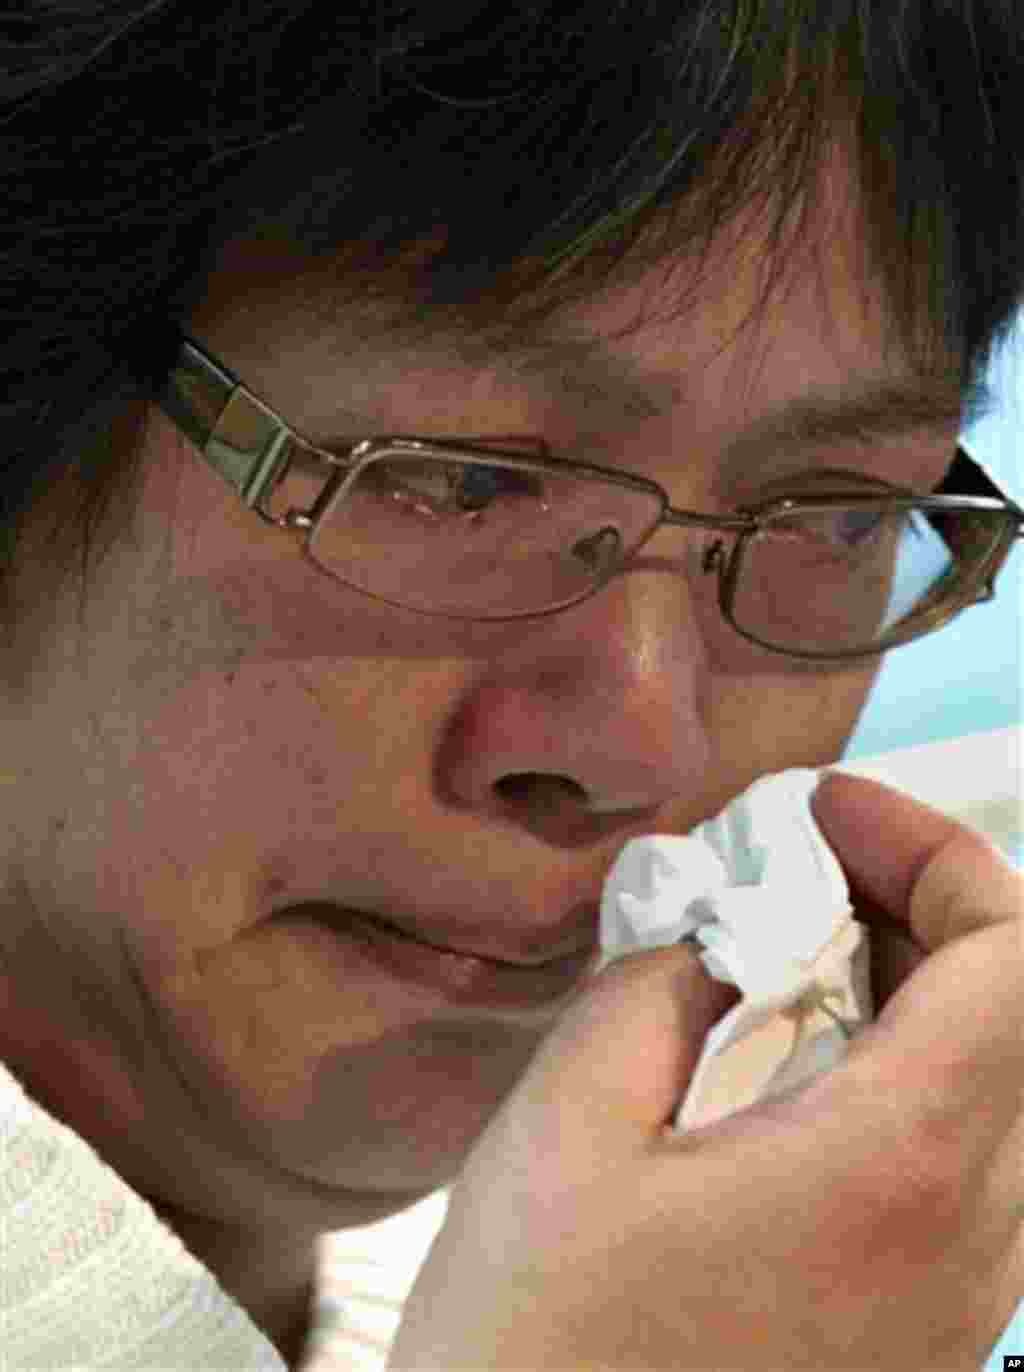 Su Zhen Chen, mother of Danny Chen, wipes away tears as she listens during a press conference on Thursday, Jan. 5, 2012 in New York. (AP Photo)